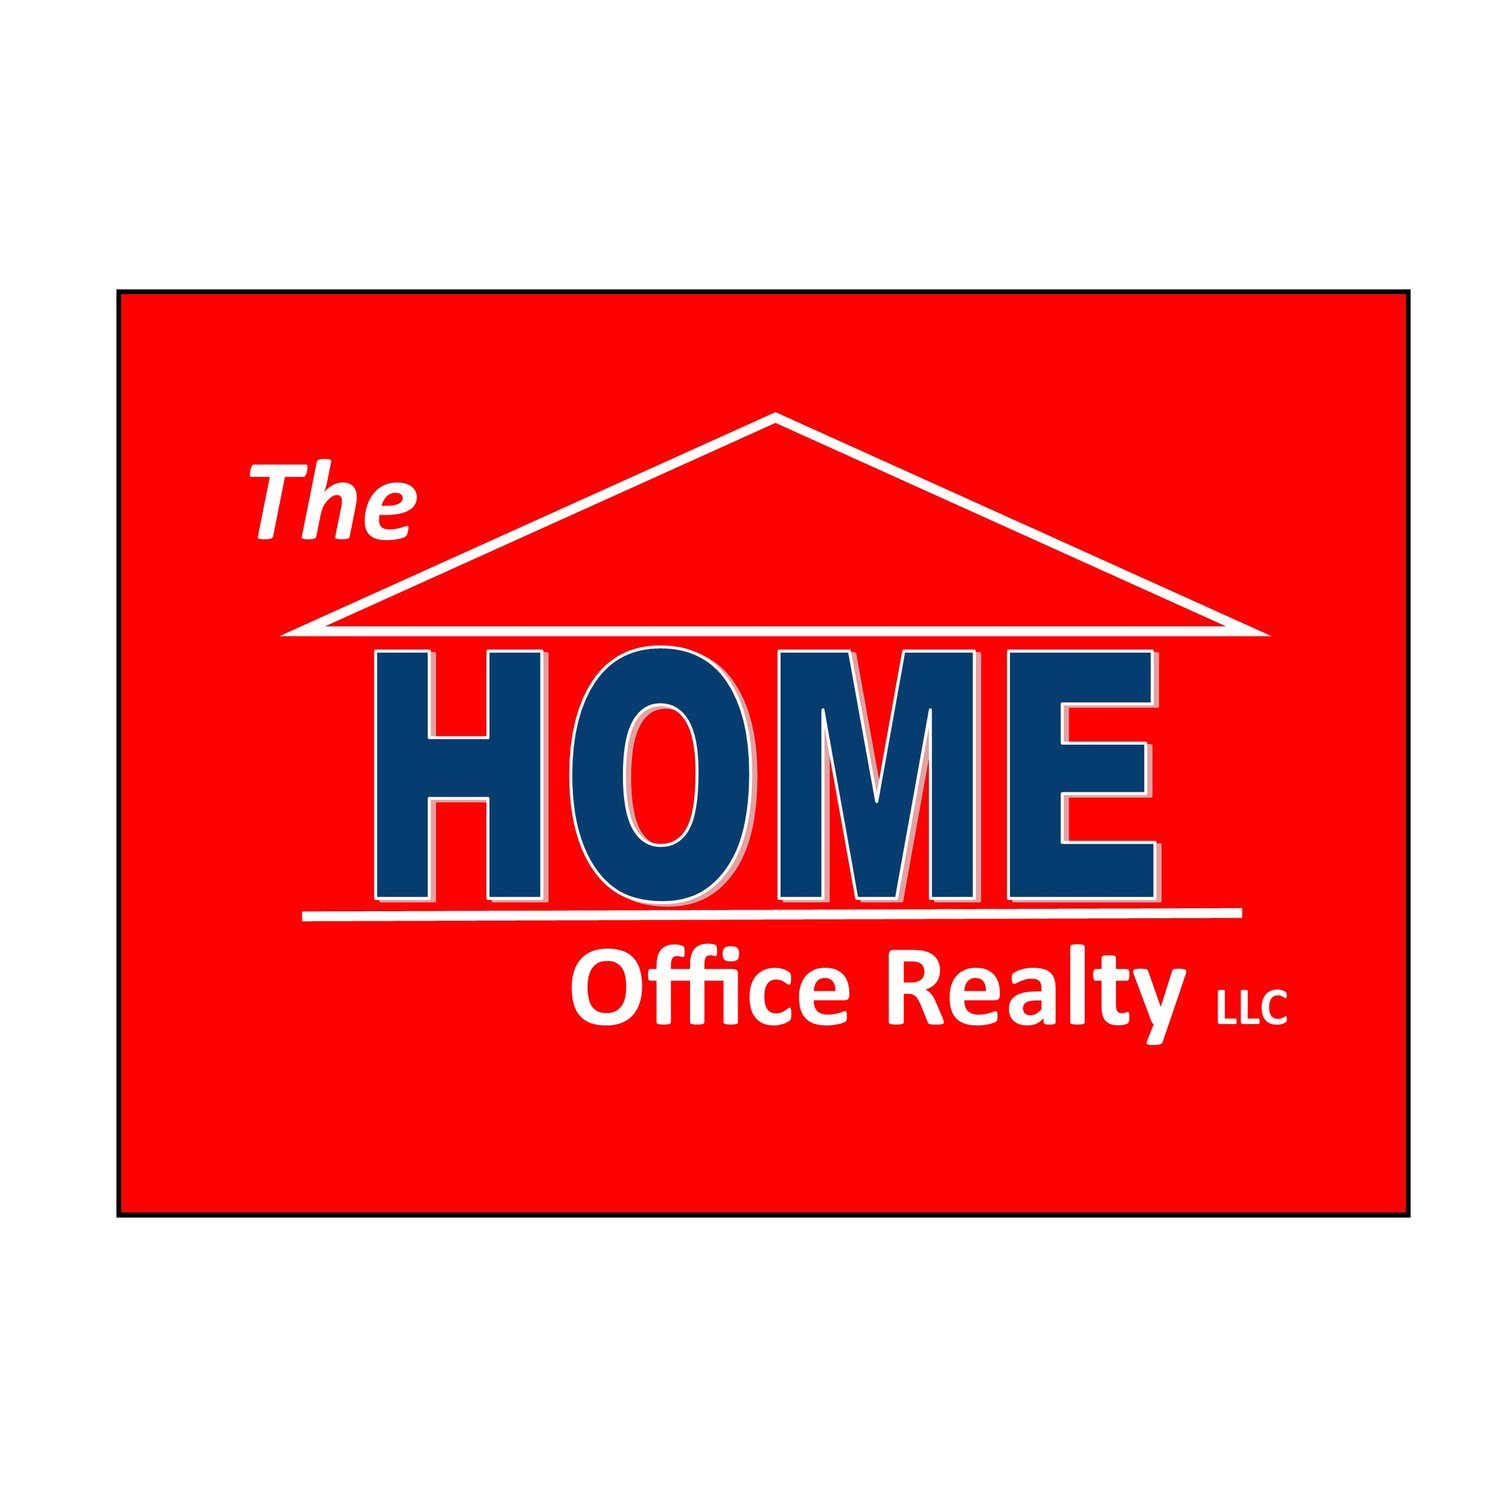 The Home Office Realty